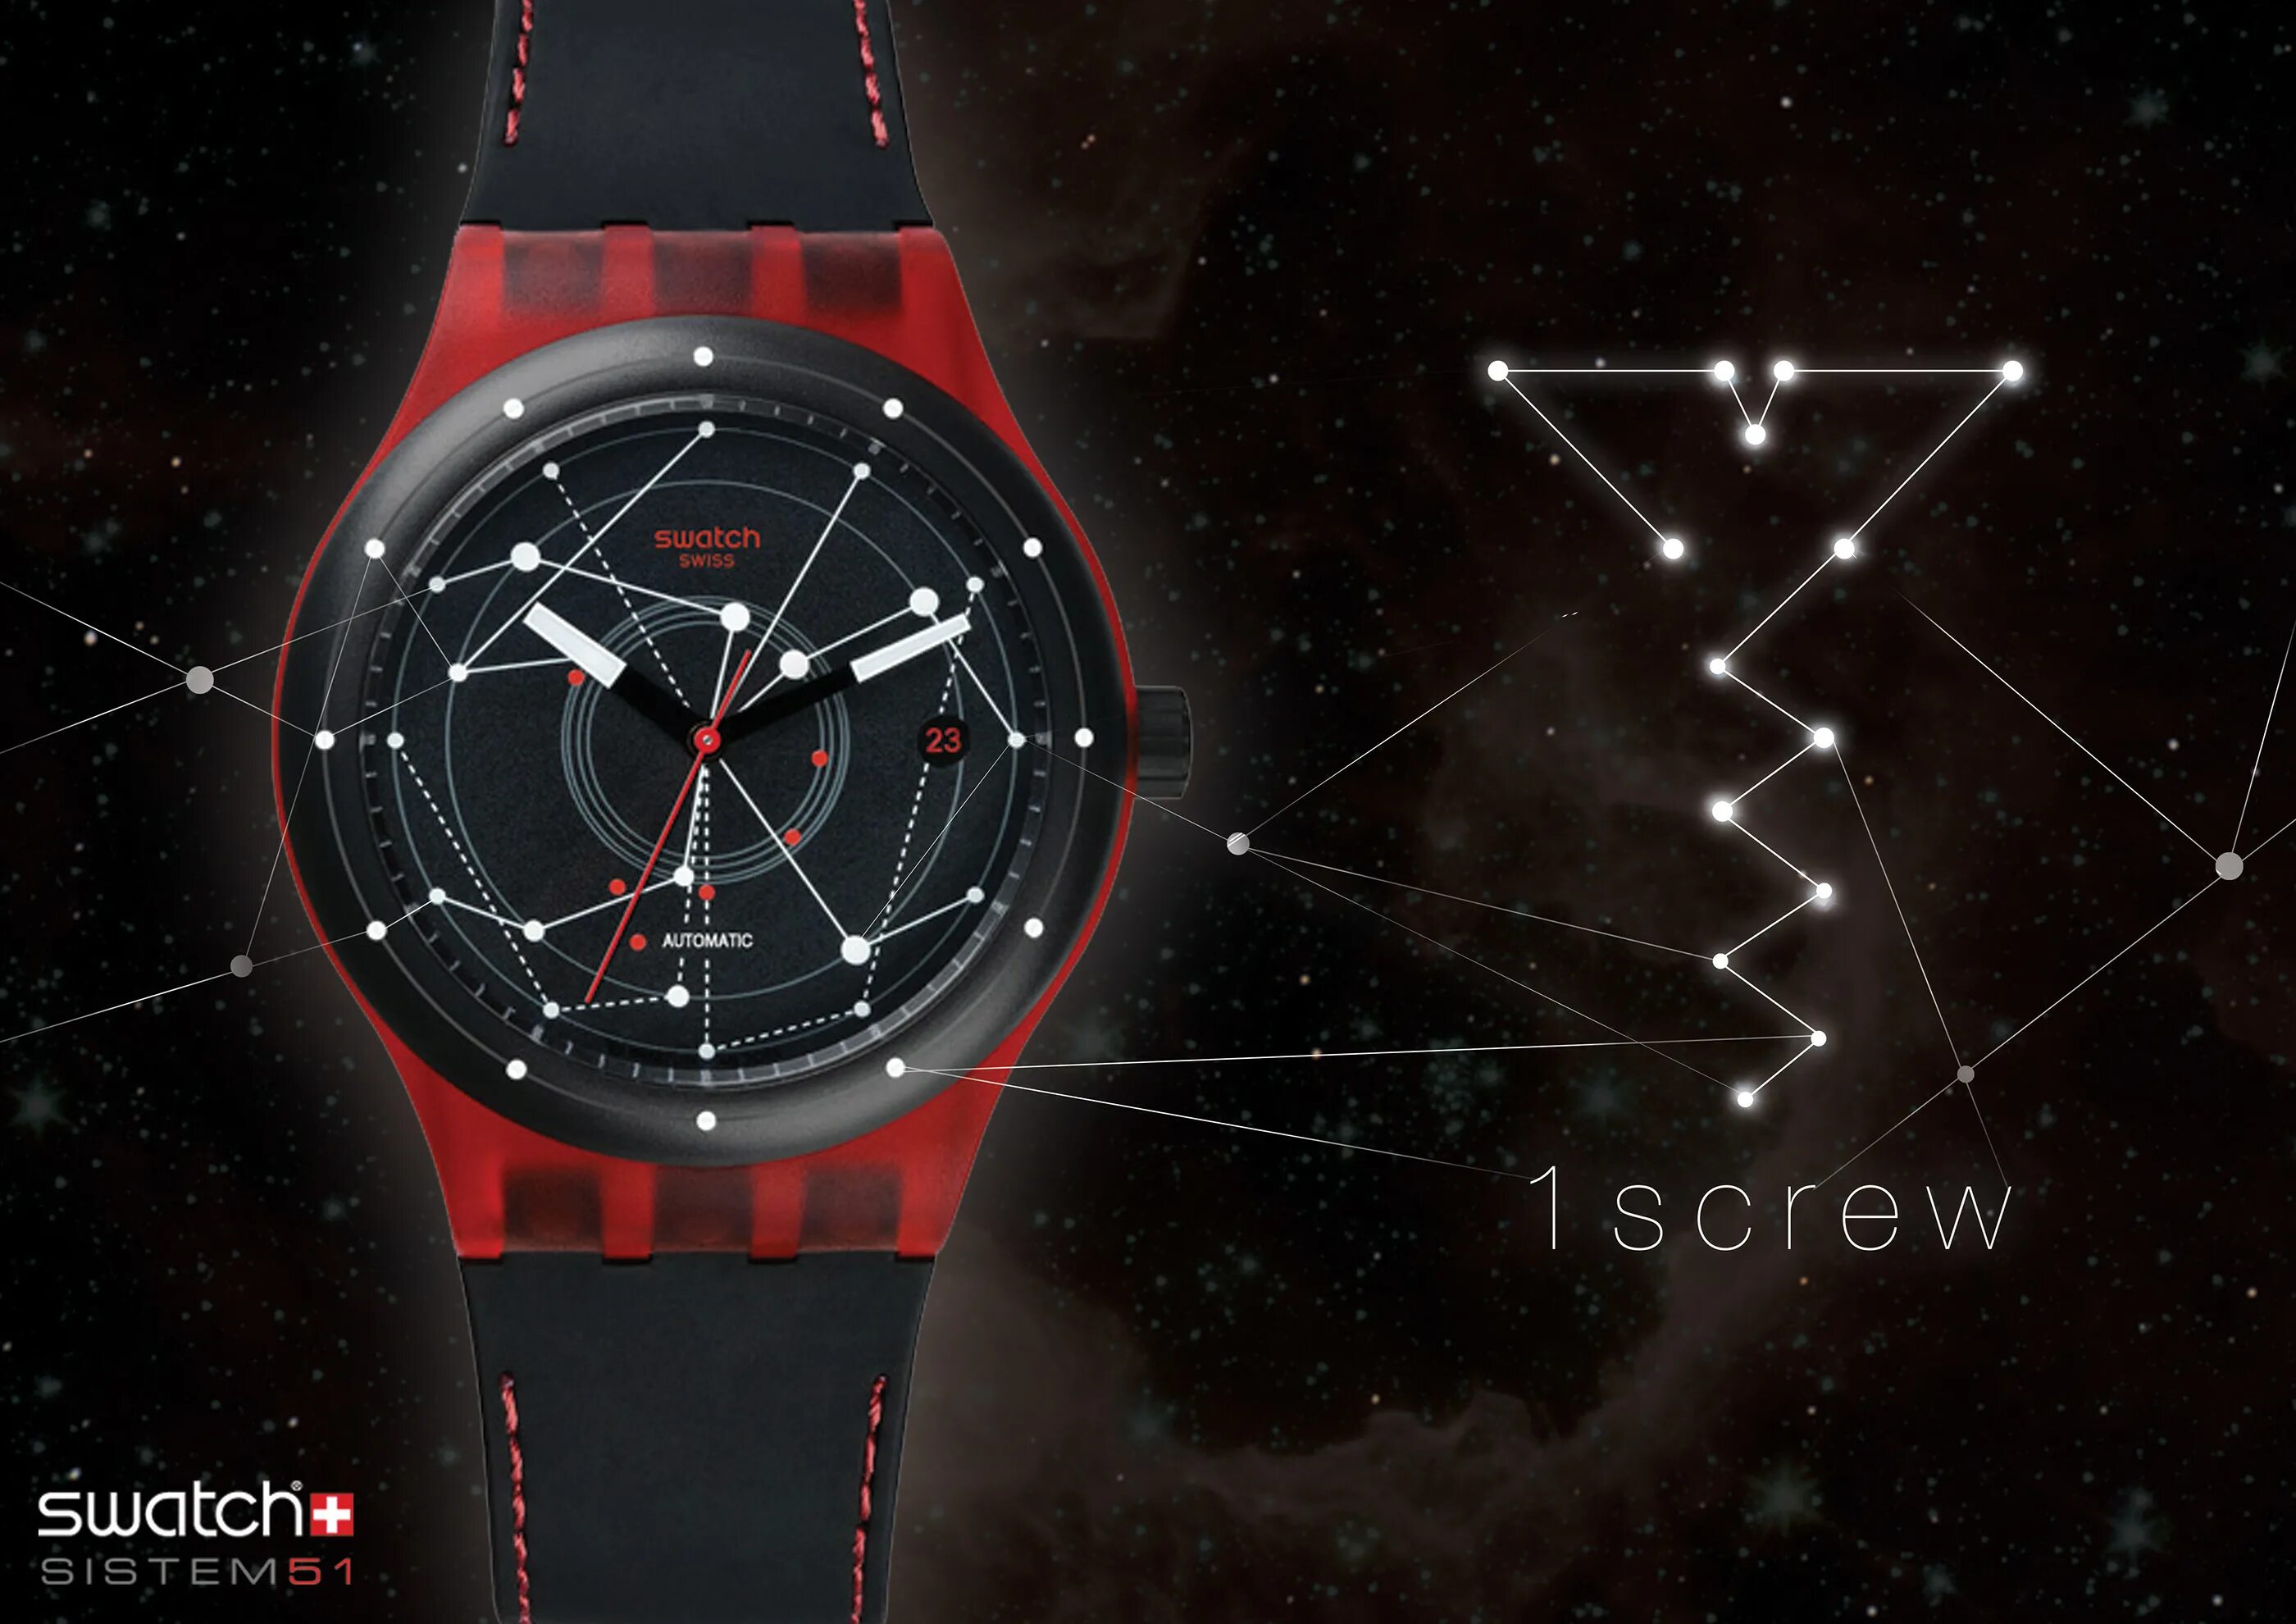 Connect времена. Swatch System 51 черные с вырезом. Britty time and Space 2021 Ep.